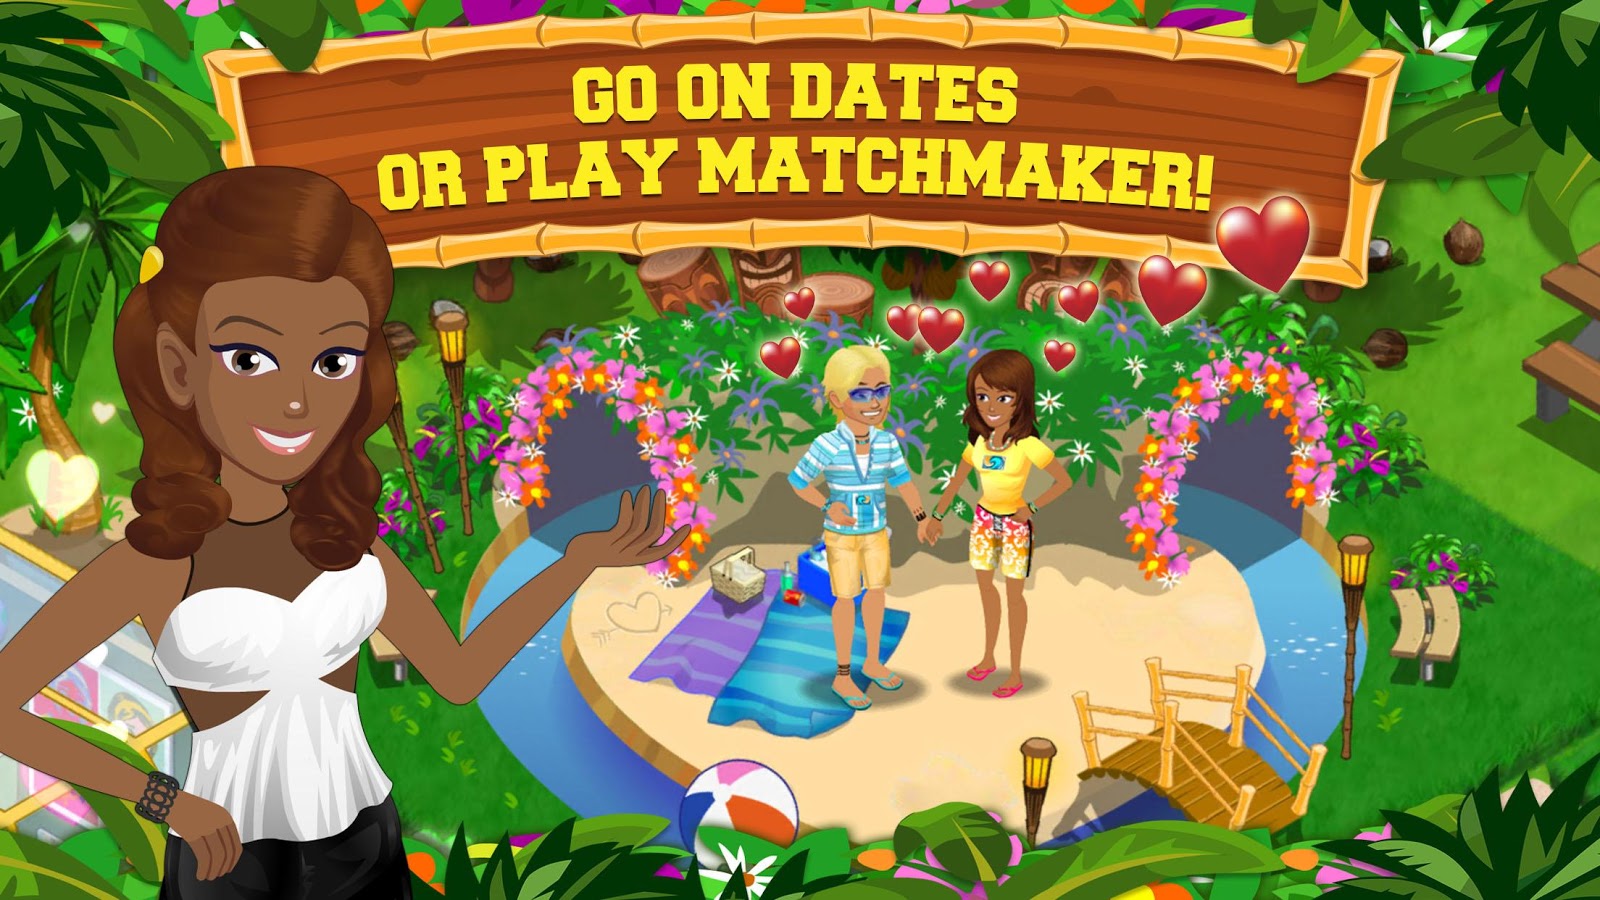 A femme looking person and a gender ambiguous person hold hands on a sandy island near two tunnels in a park. Femme looking person gestures towards text. Text reads 'Go on dates, or play matchmaker'.